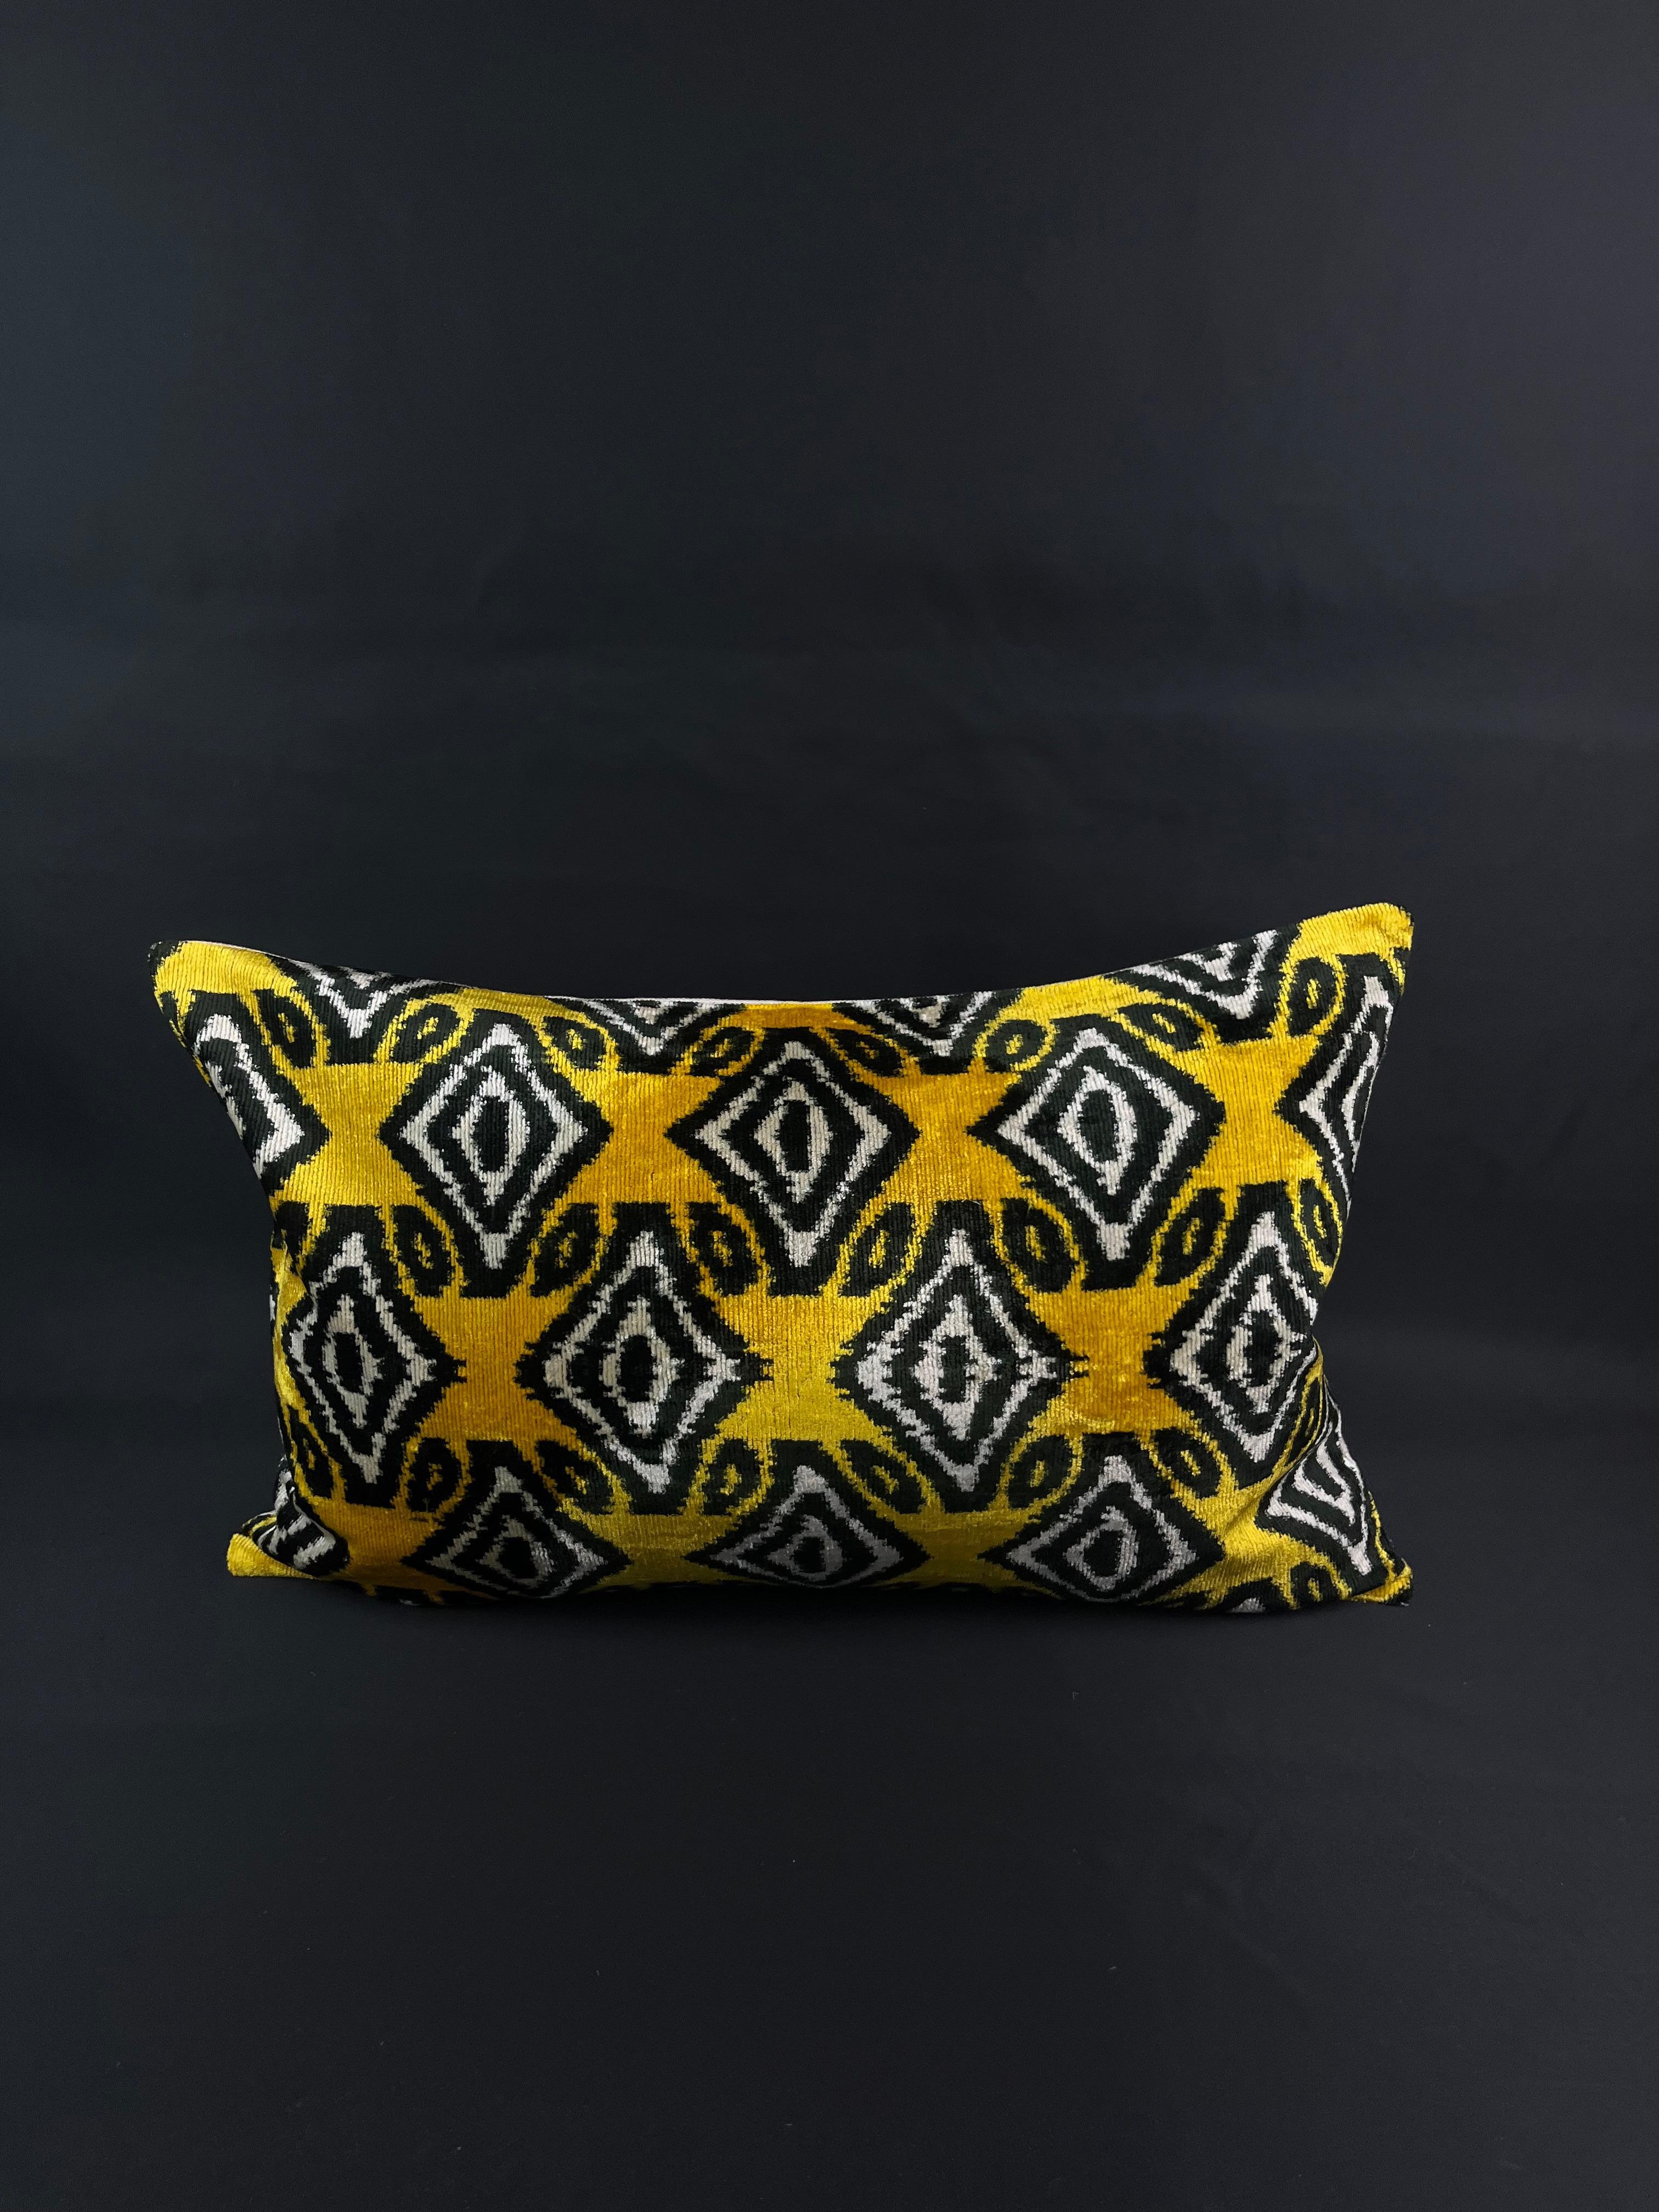 Black and Yellow Geometric Design Velvet Silk Ikat Pillow Cover In New Condition For Sale In Houston, TX